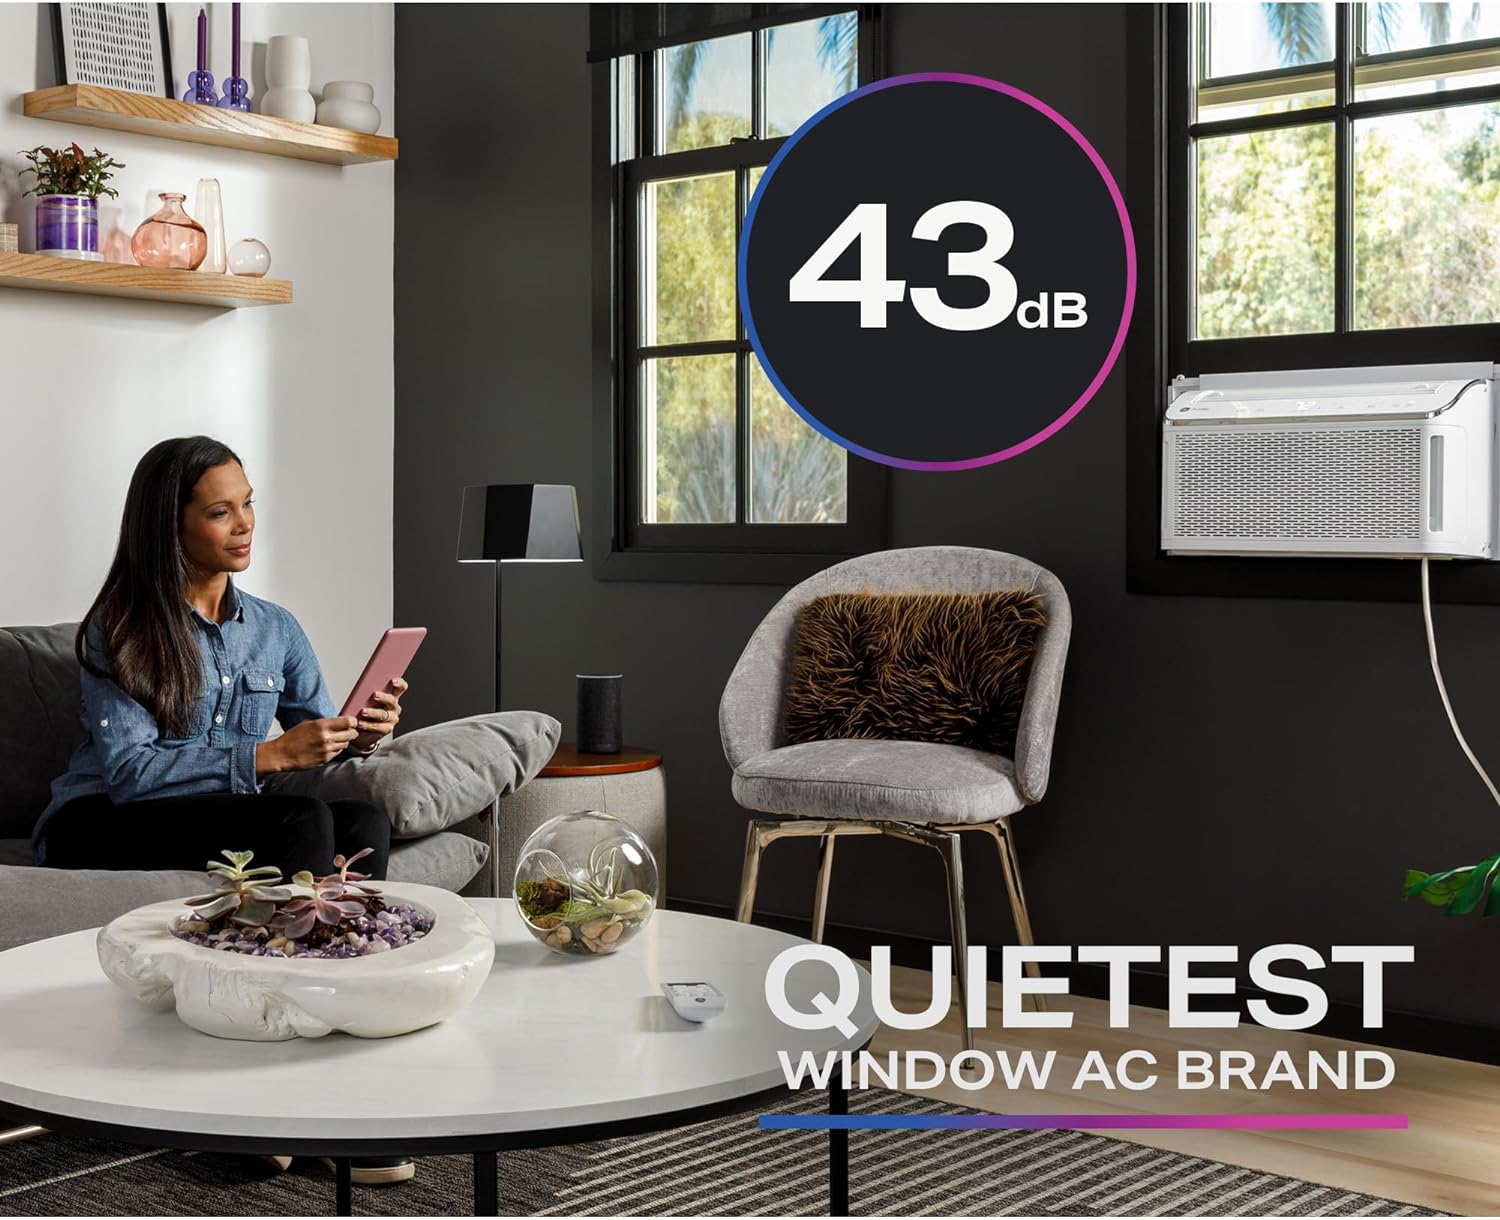 GE Profile Ultra Quiet Window Air Conditioner 8,200 BTU, WiFi Enabled, Ideal for Medium Rooms, Easy Installation with Included Kit, 8K Window AC Unit, White